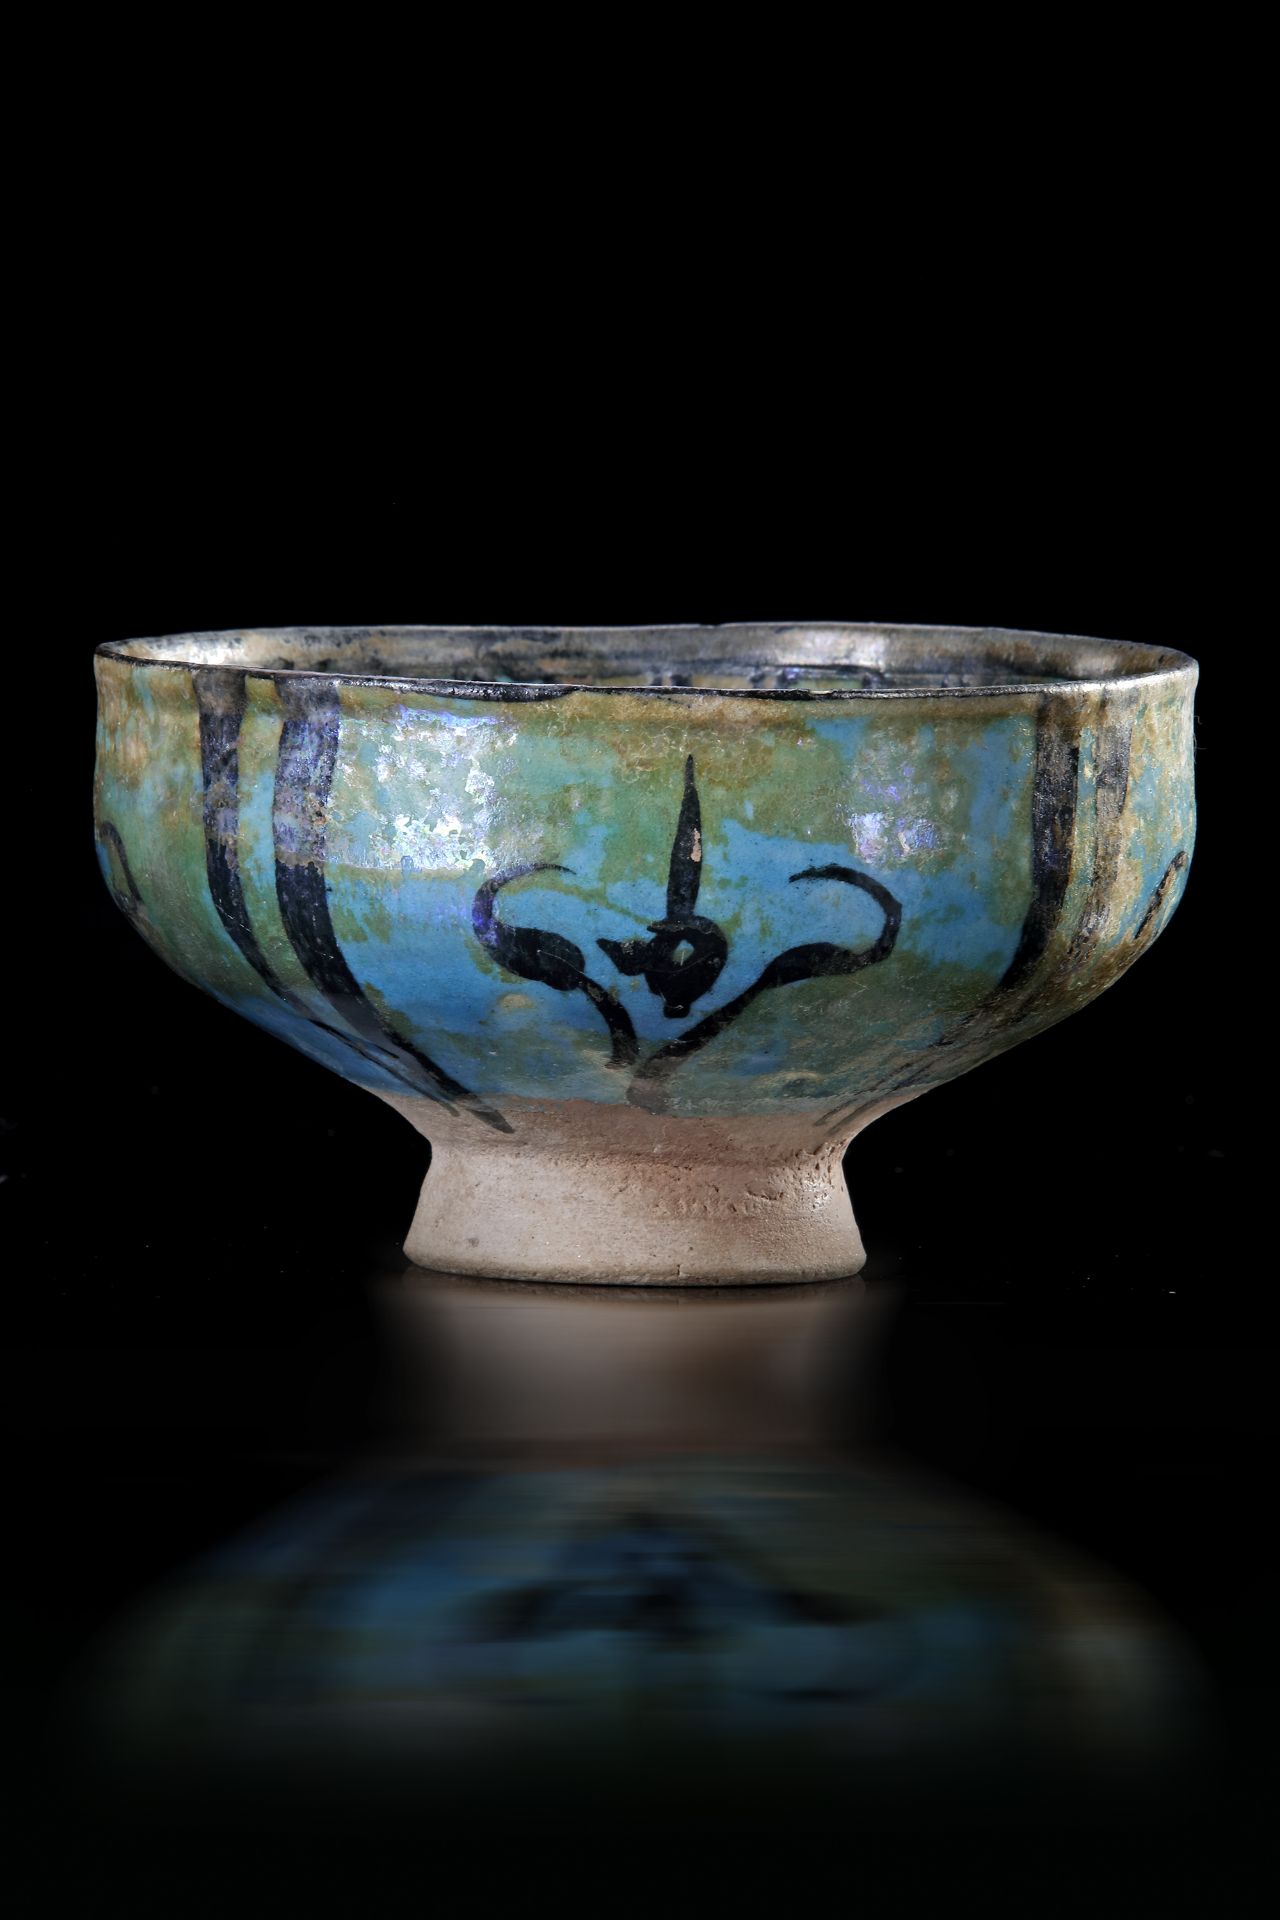 A KASHAN TURQUOISE AND BLACK DECORATED BOWL, PERSIA, 13TH CENTURY - Image 2 of 4